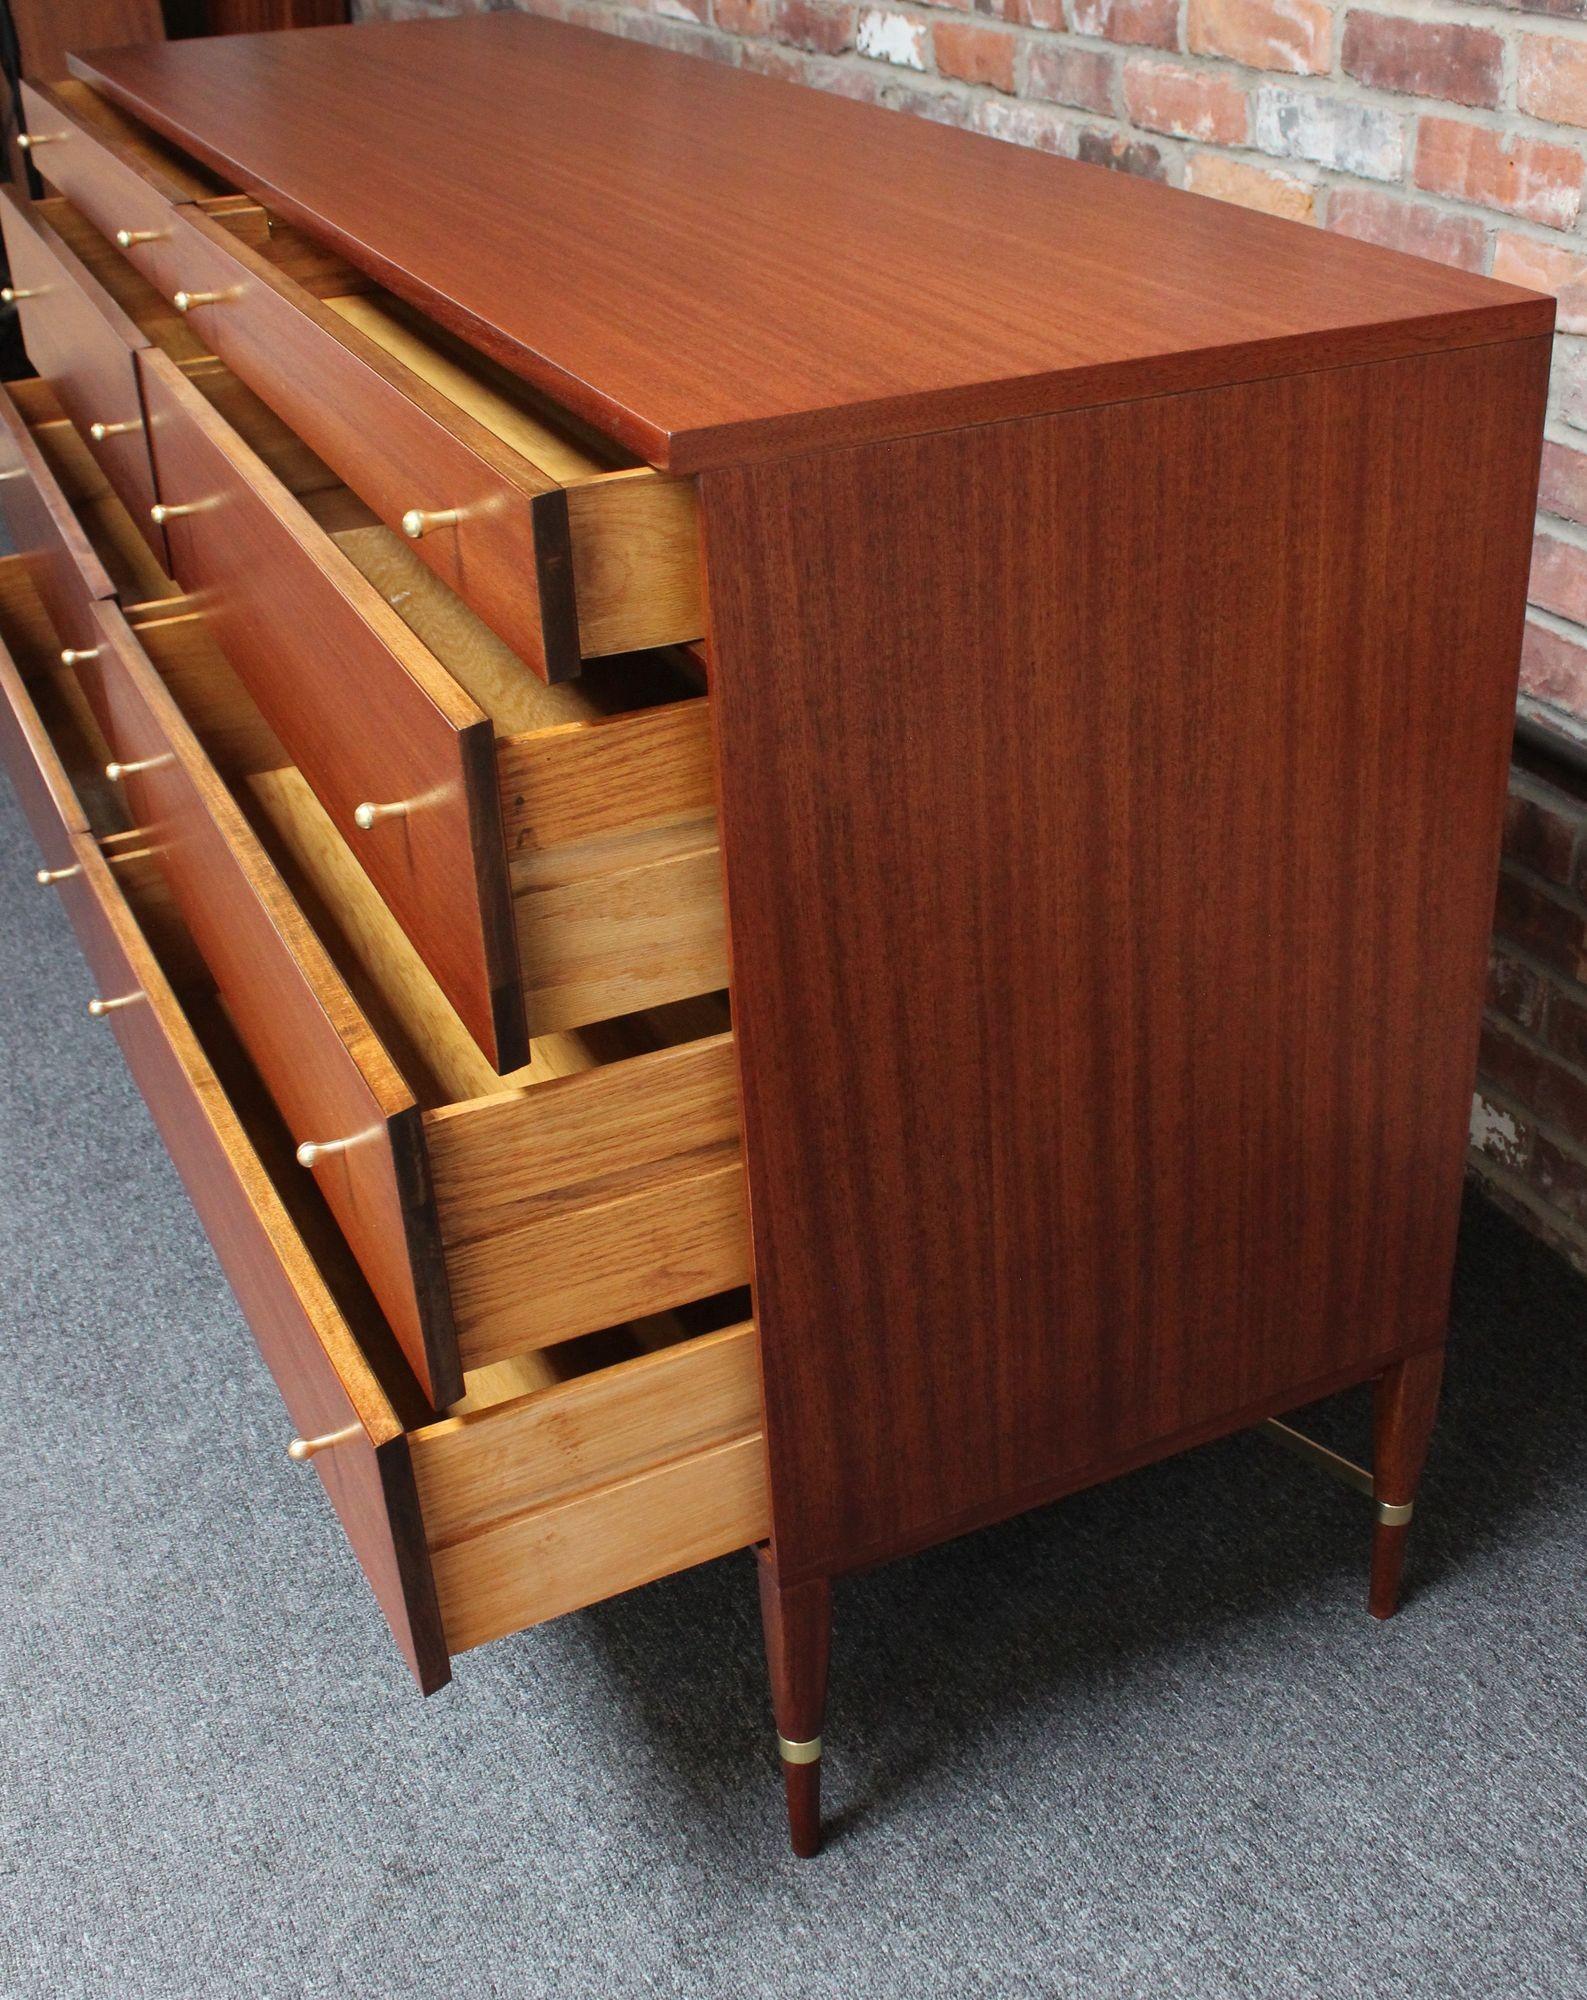 Paul Mccobb Calvin Group Mahogany and Brass Double Dresser / Chest of Drawers 1